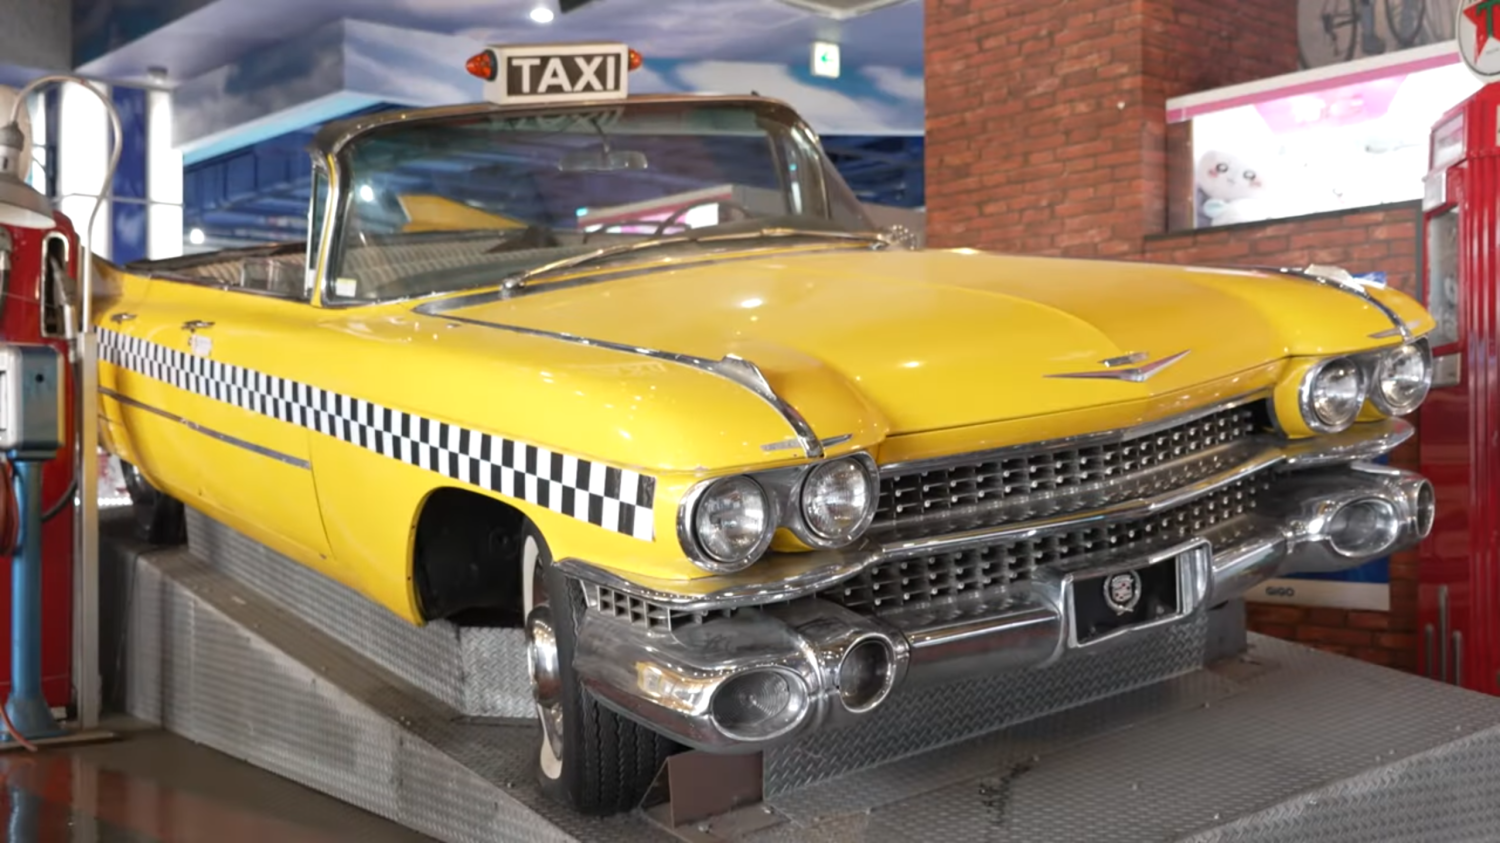 New Crazy Taxi has online multiplayer, big emphasis on freedom and chaos [Video]